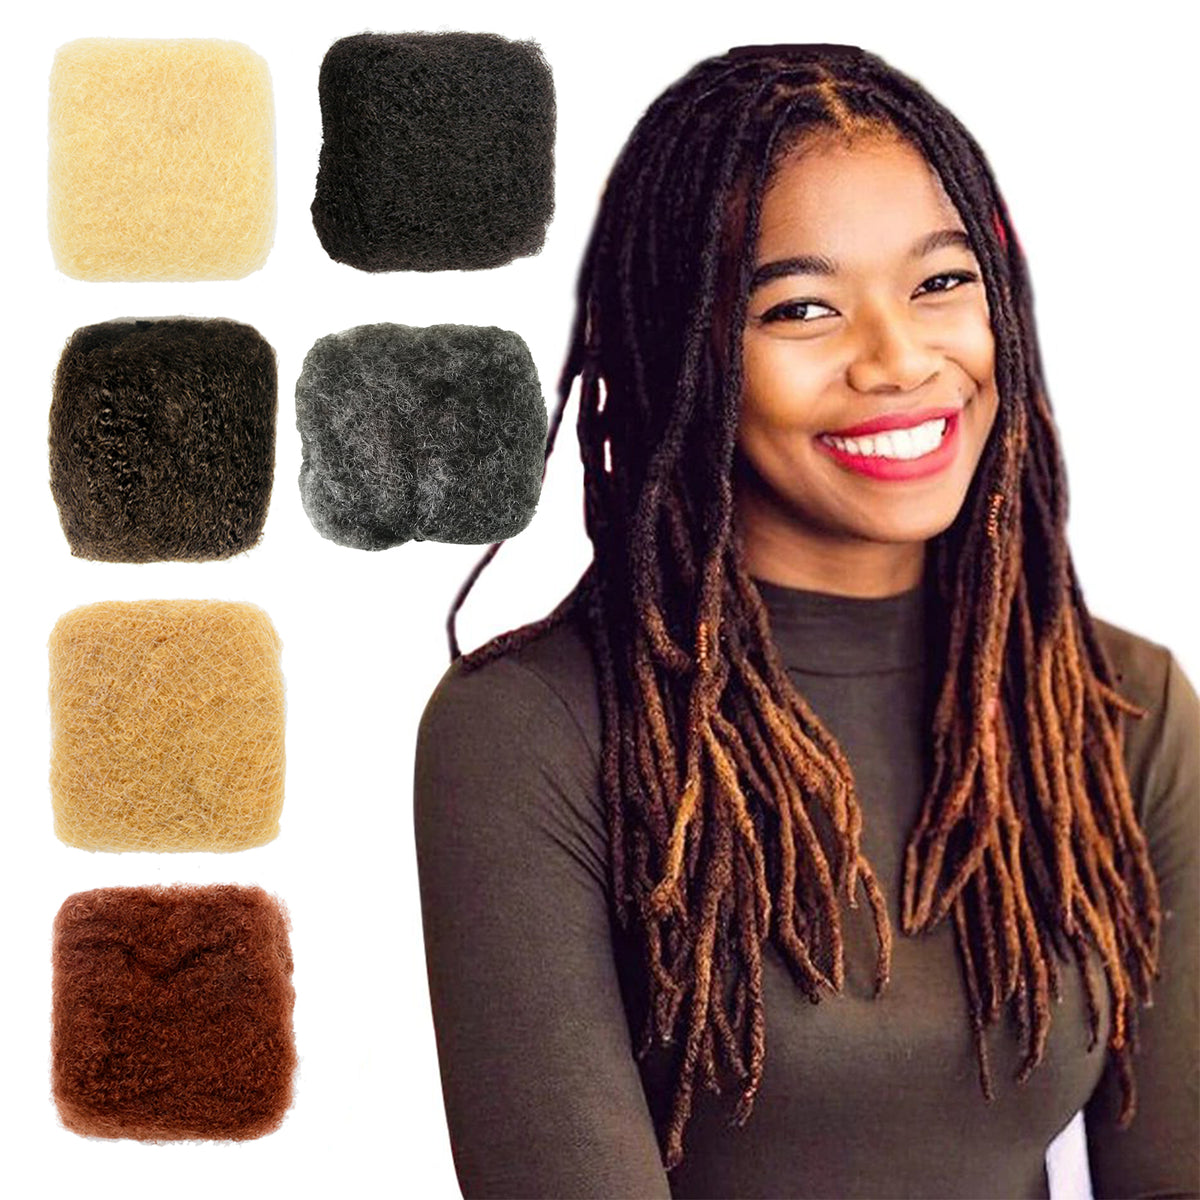 PerfectTranzitions Afro Kinky Human Hairs For Making,Repairing & Bulking Locs 10 Inch Long Afro Kinky Bulk Human Hair For Dreadlock Extensions 100% Natural Afro Hairs For Twisting & Braiding 29g/1Oz (Salt & Pepper, 10 inch)